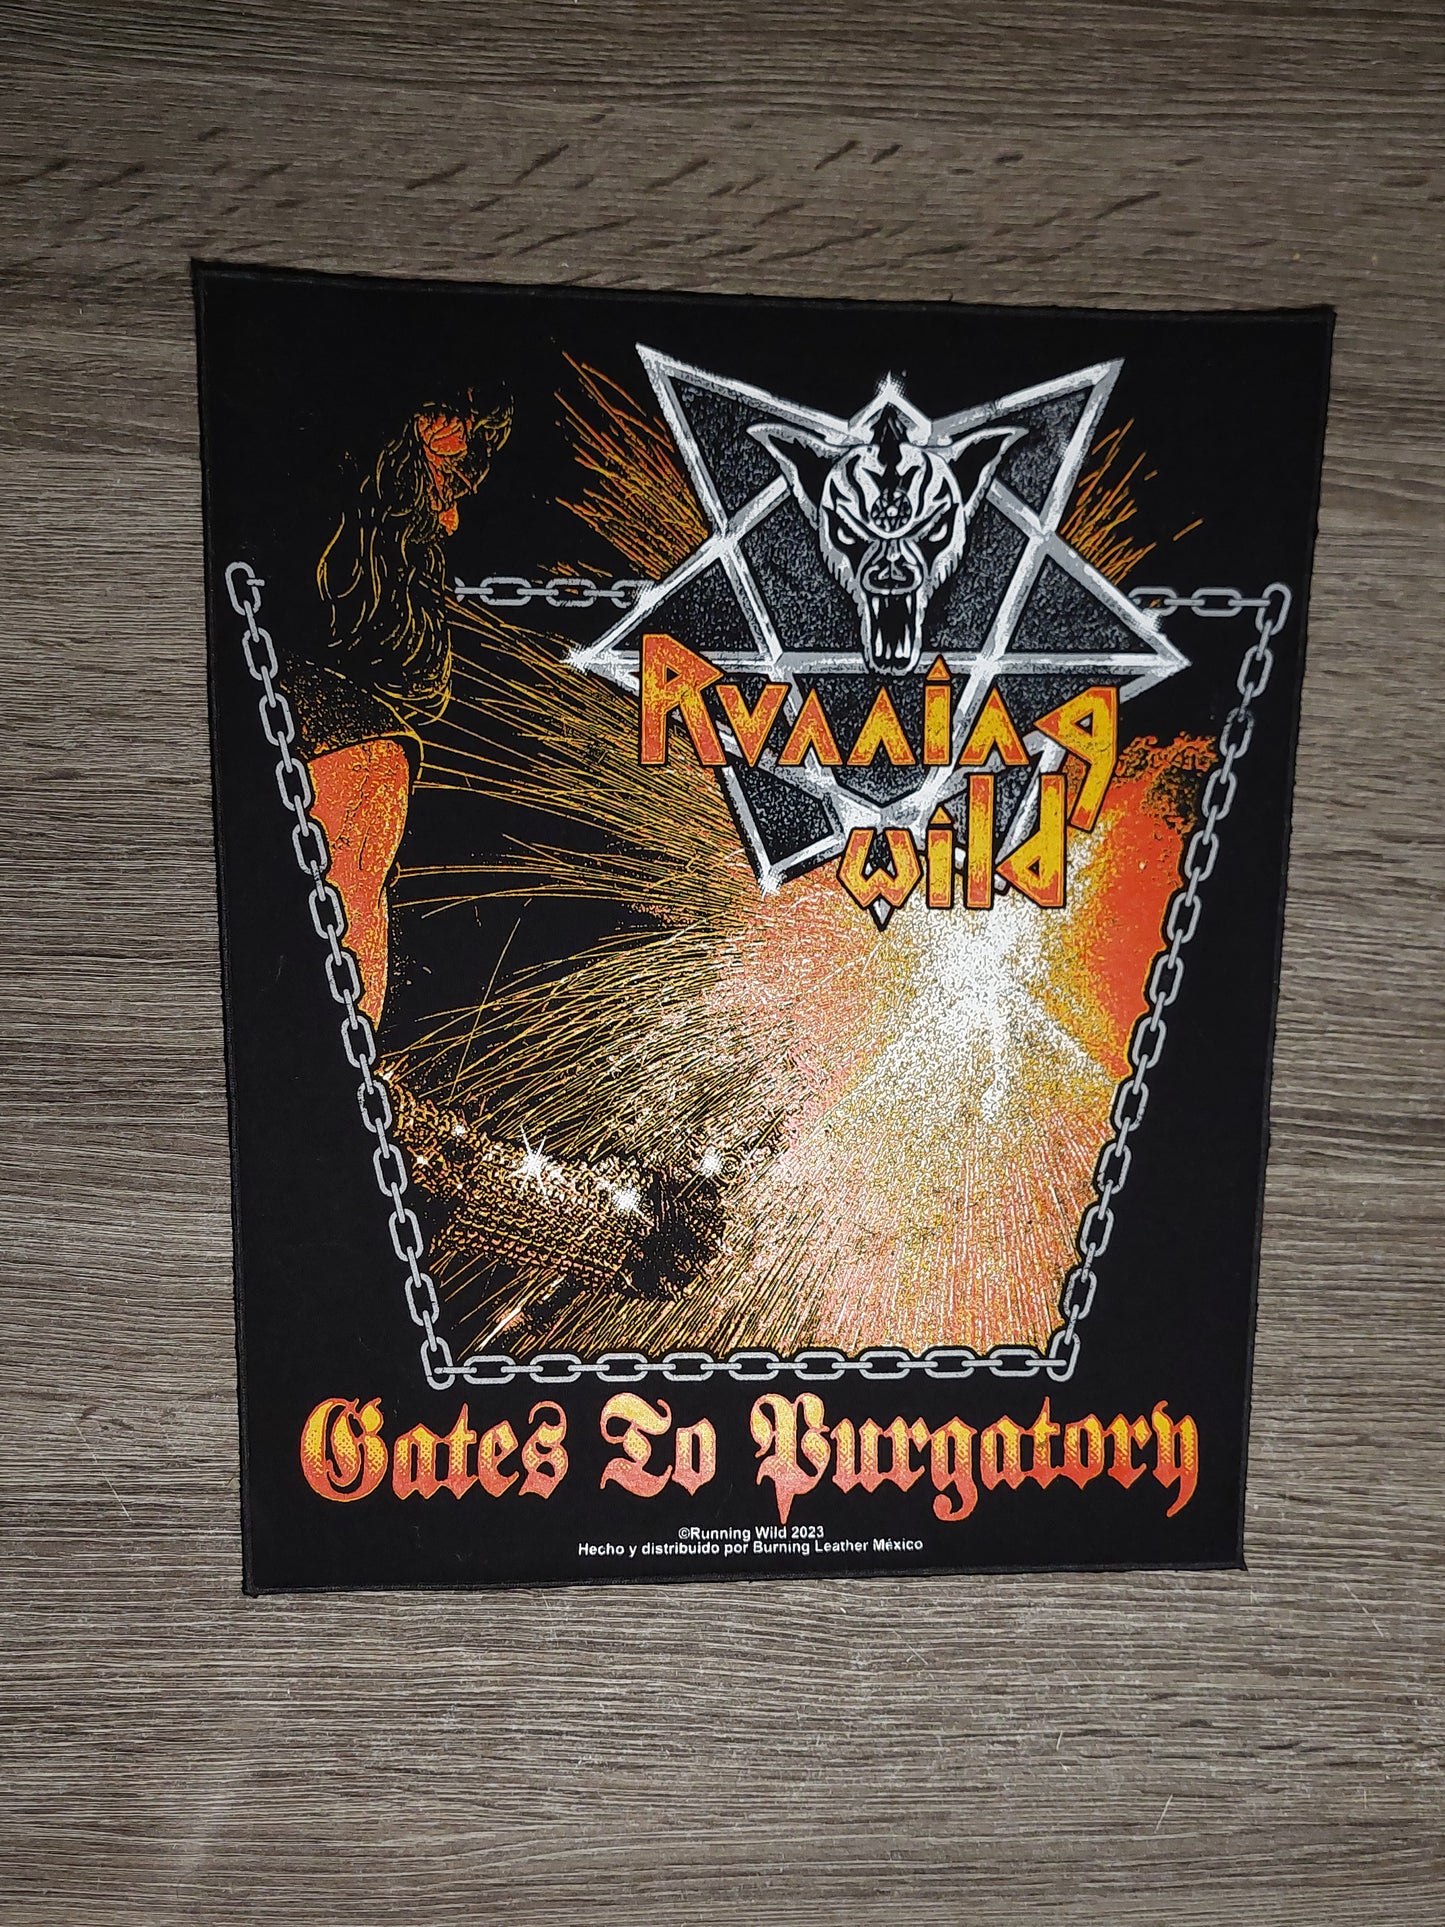 Running wild - Gates to purgatory backpatch